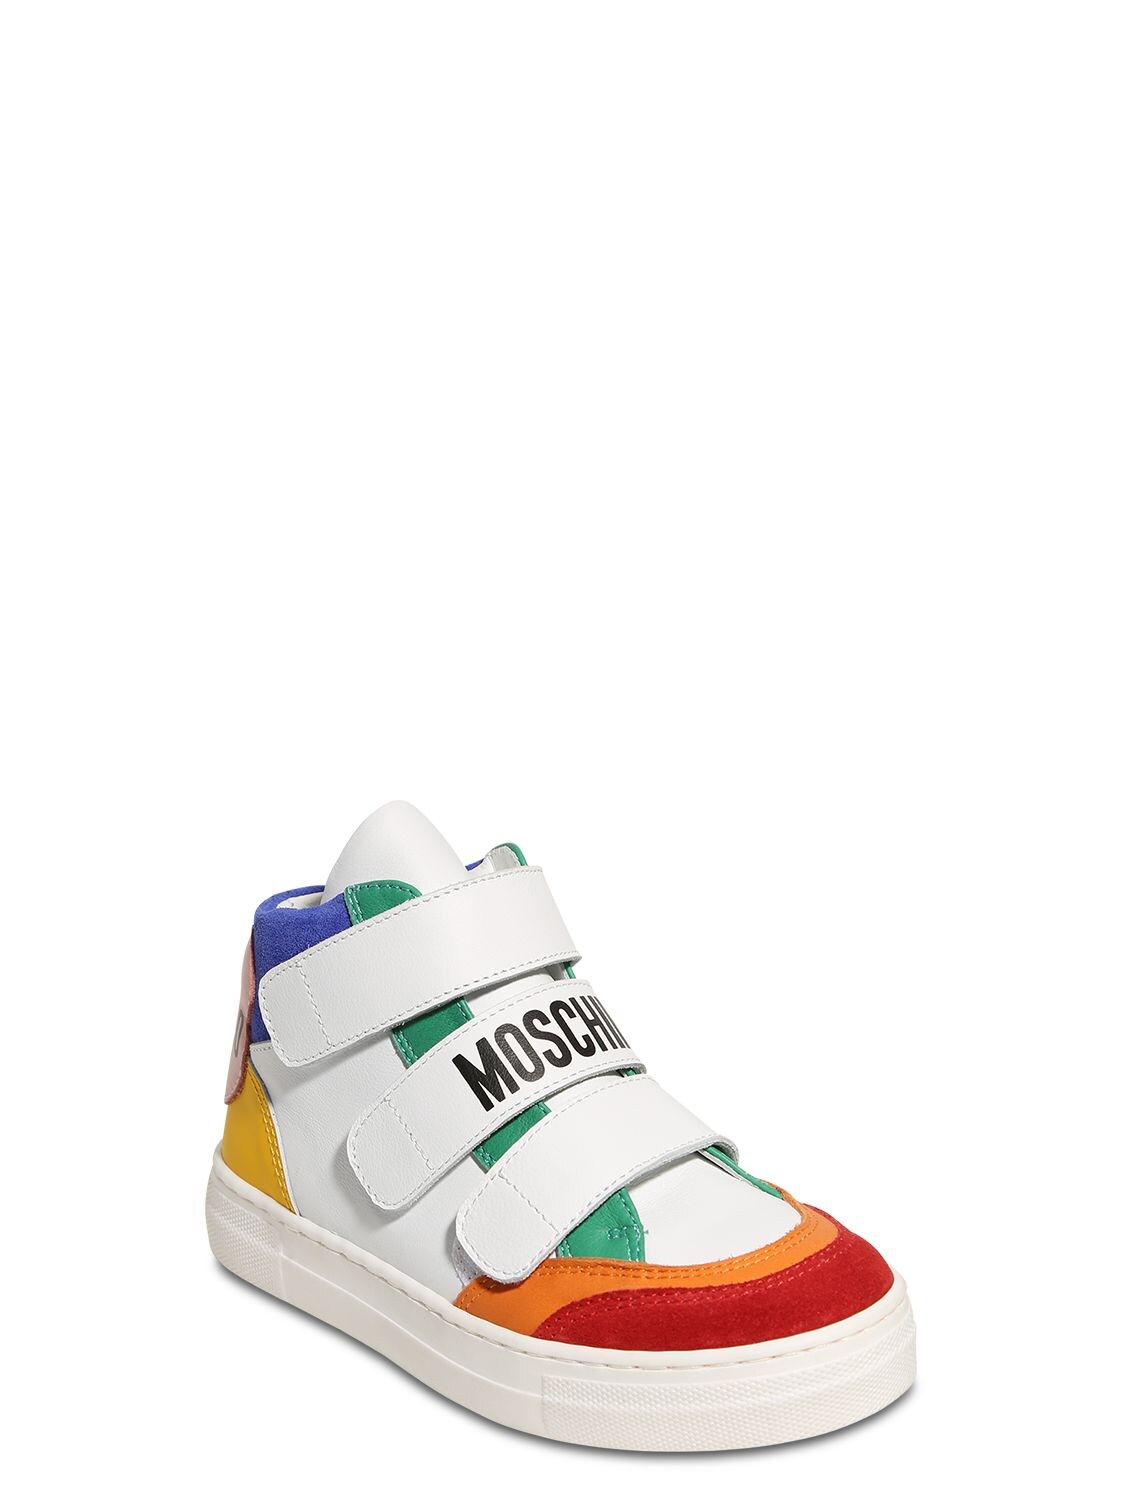 Moschino Kids' Leather & Suede High Sneakers In White